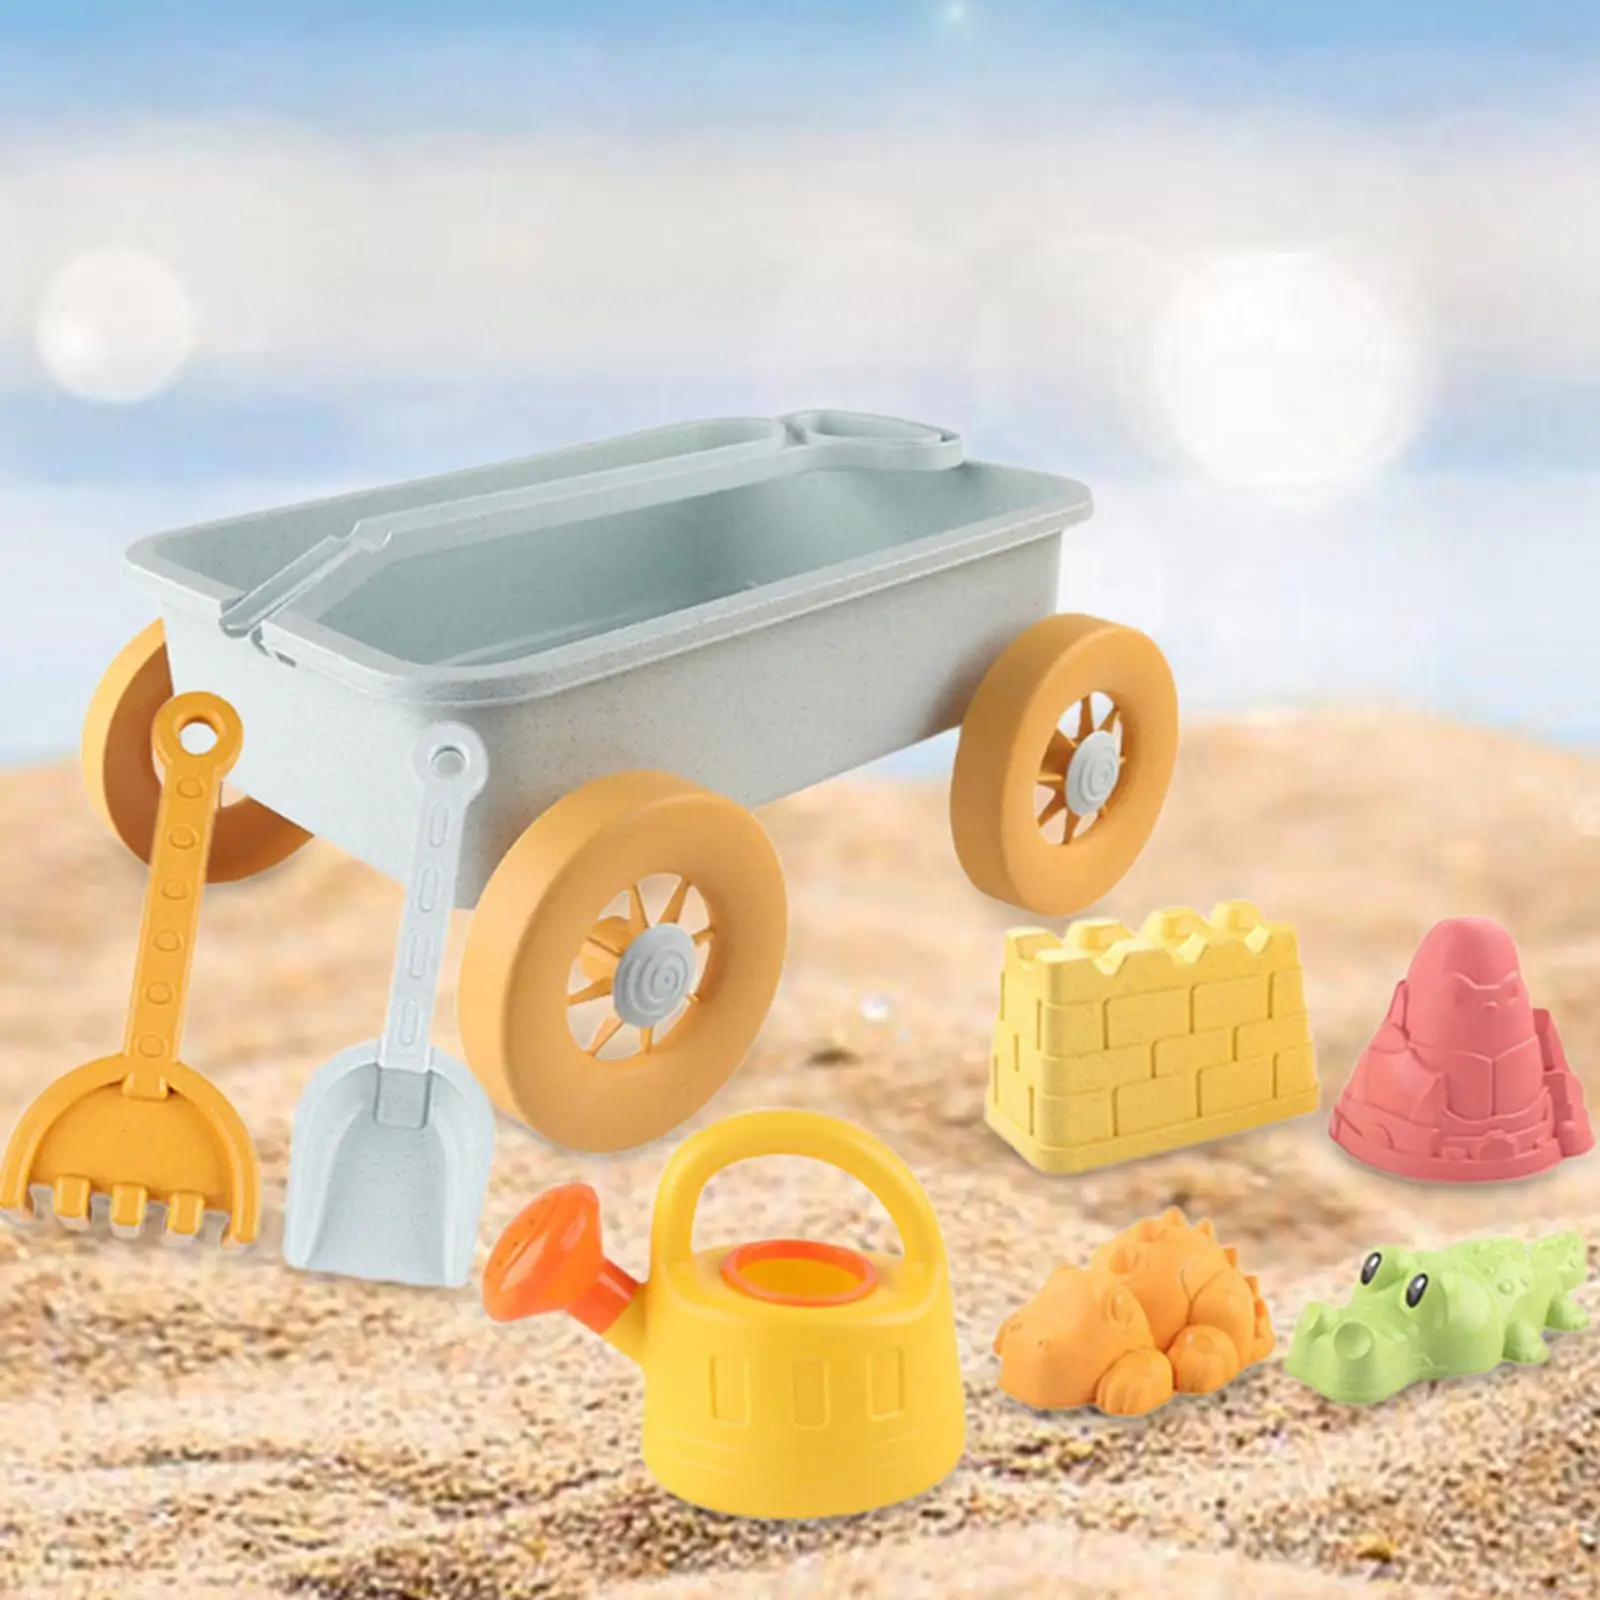 8 Pieces Beach Toys Sand Set Montessori Early Educational Garden and Beach Toys for Child Age 3-10 Outdoor Bathtime Toy Backyard